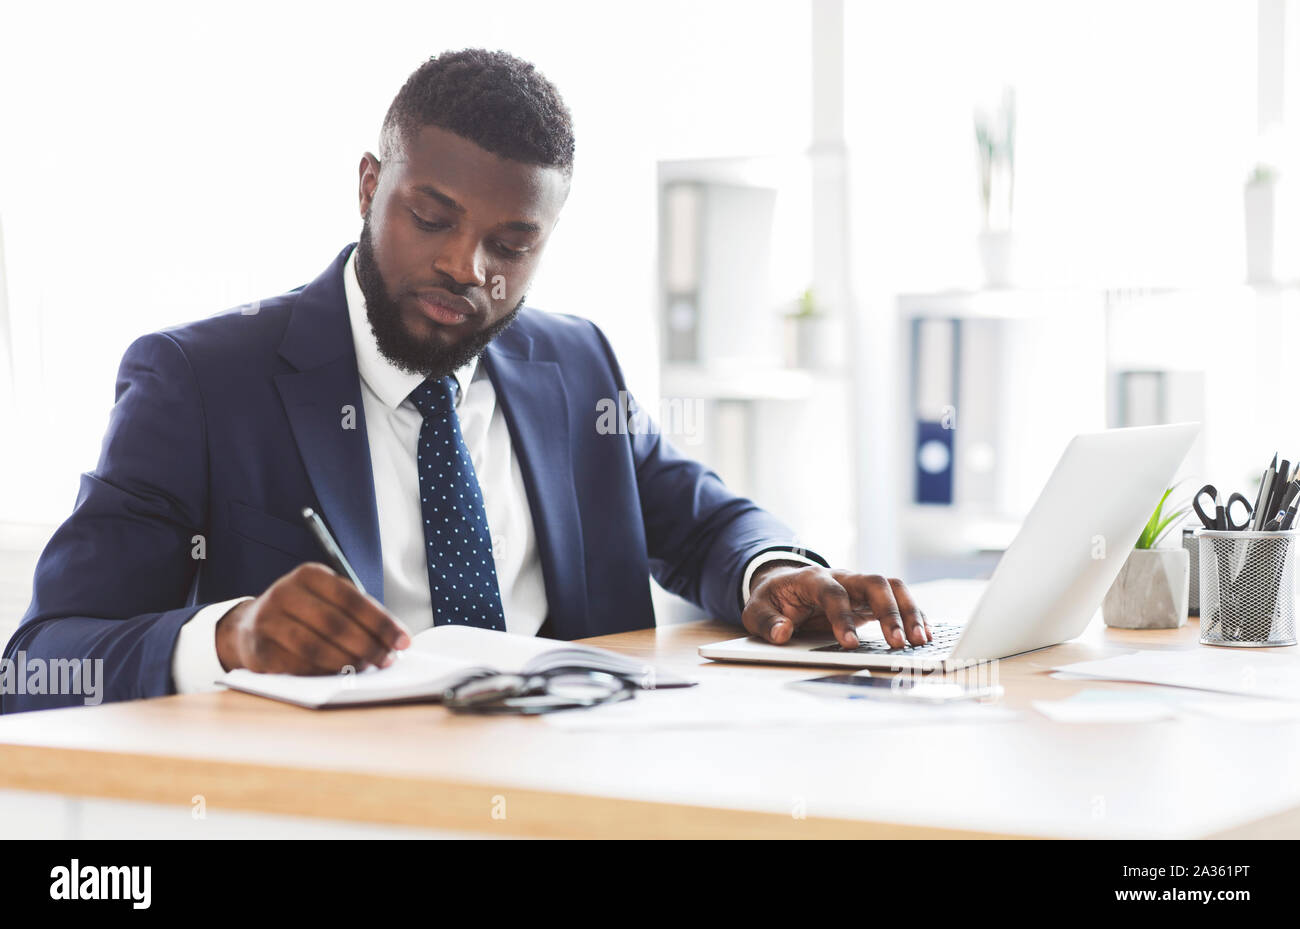 Successful black businessman working hard in office Stock Photo